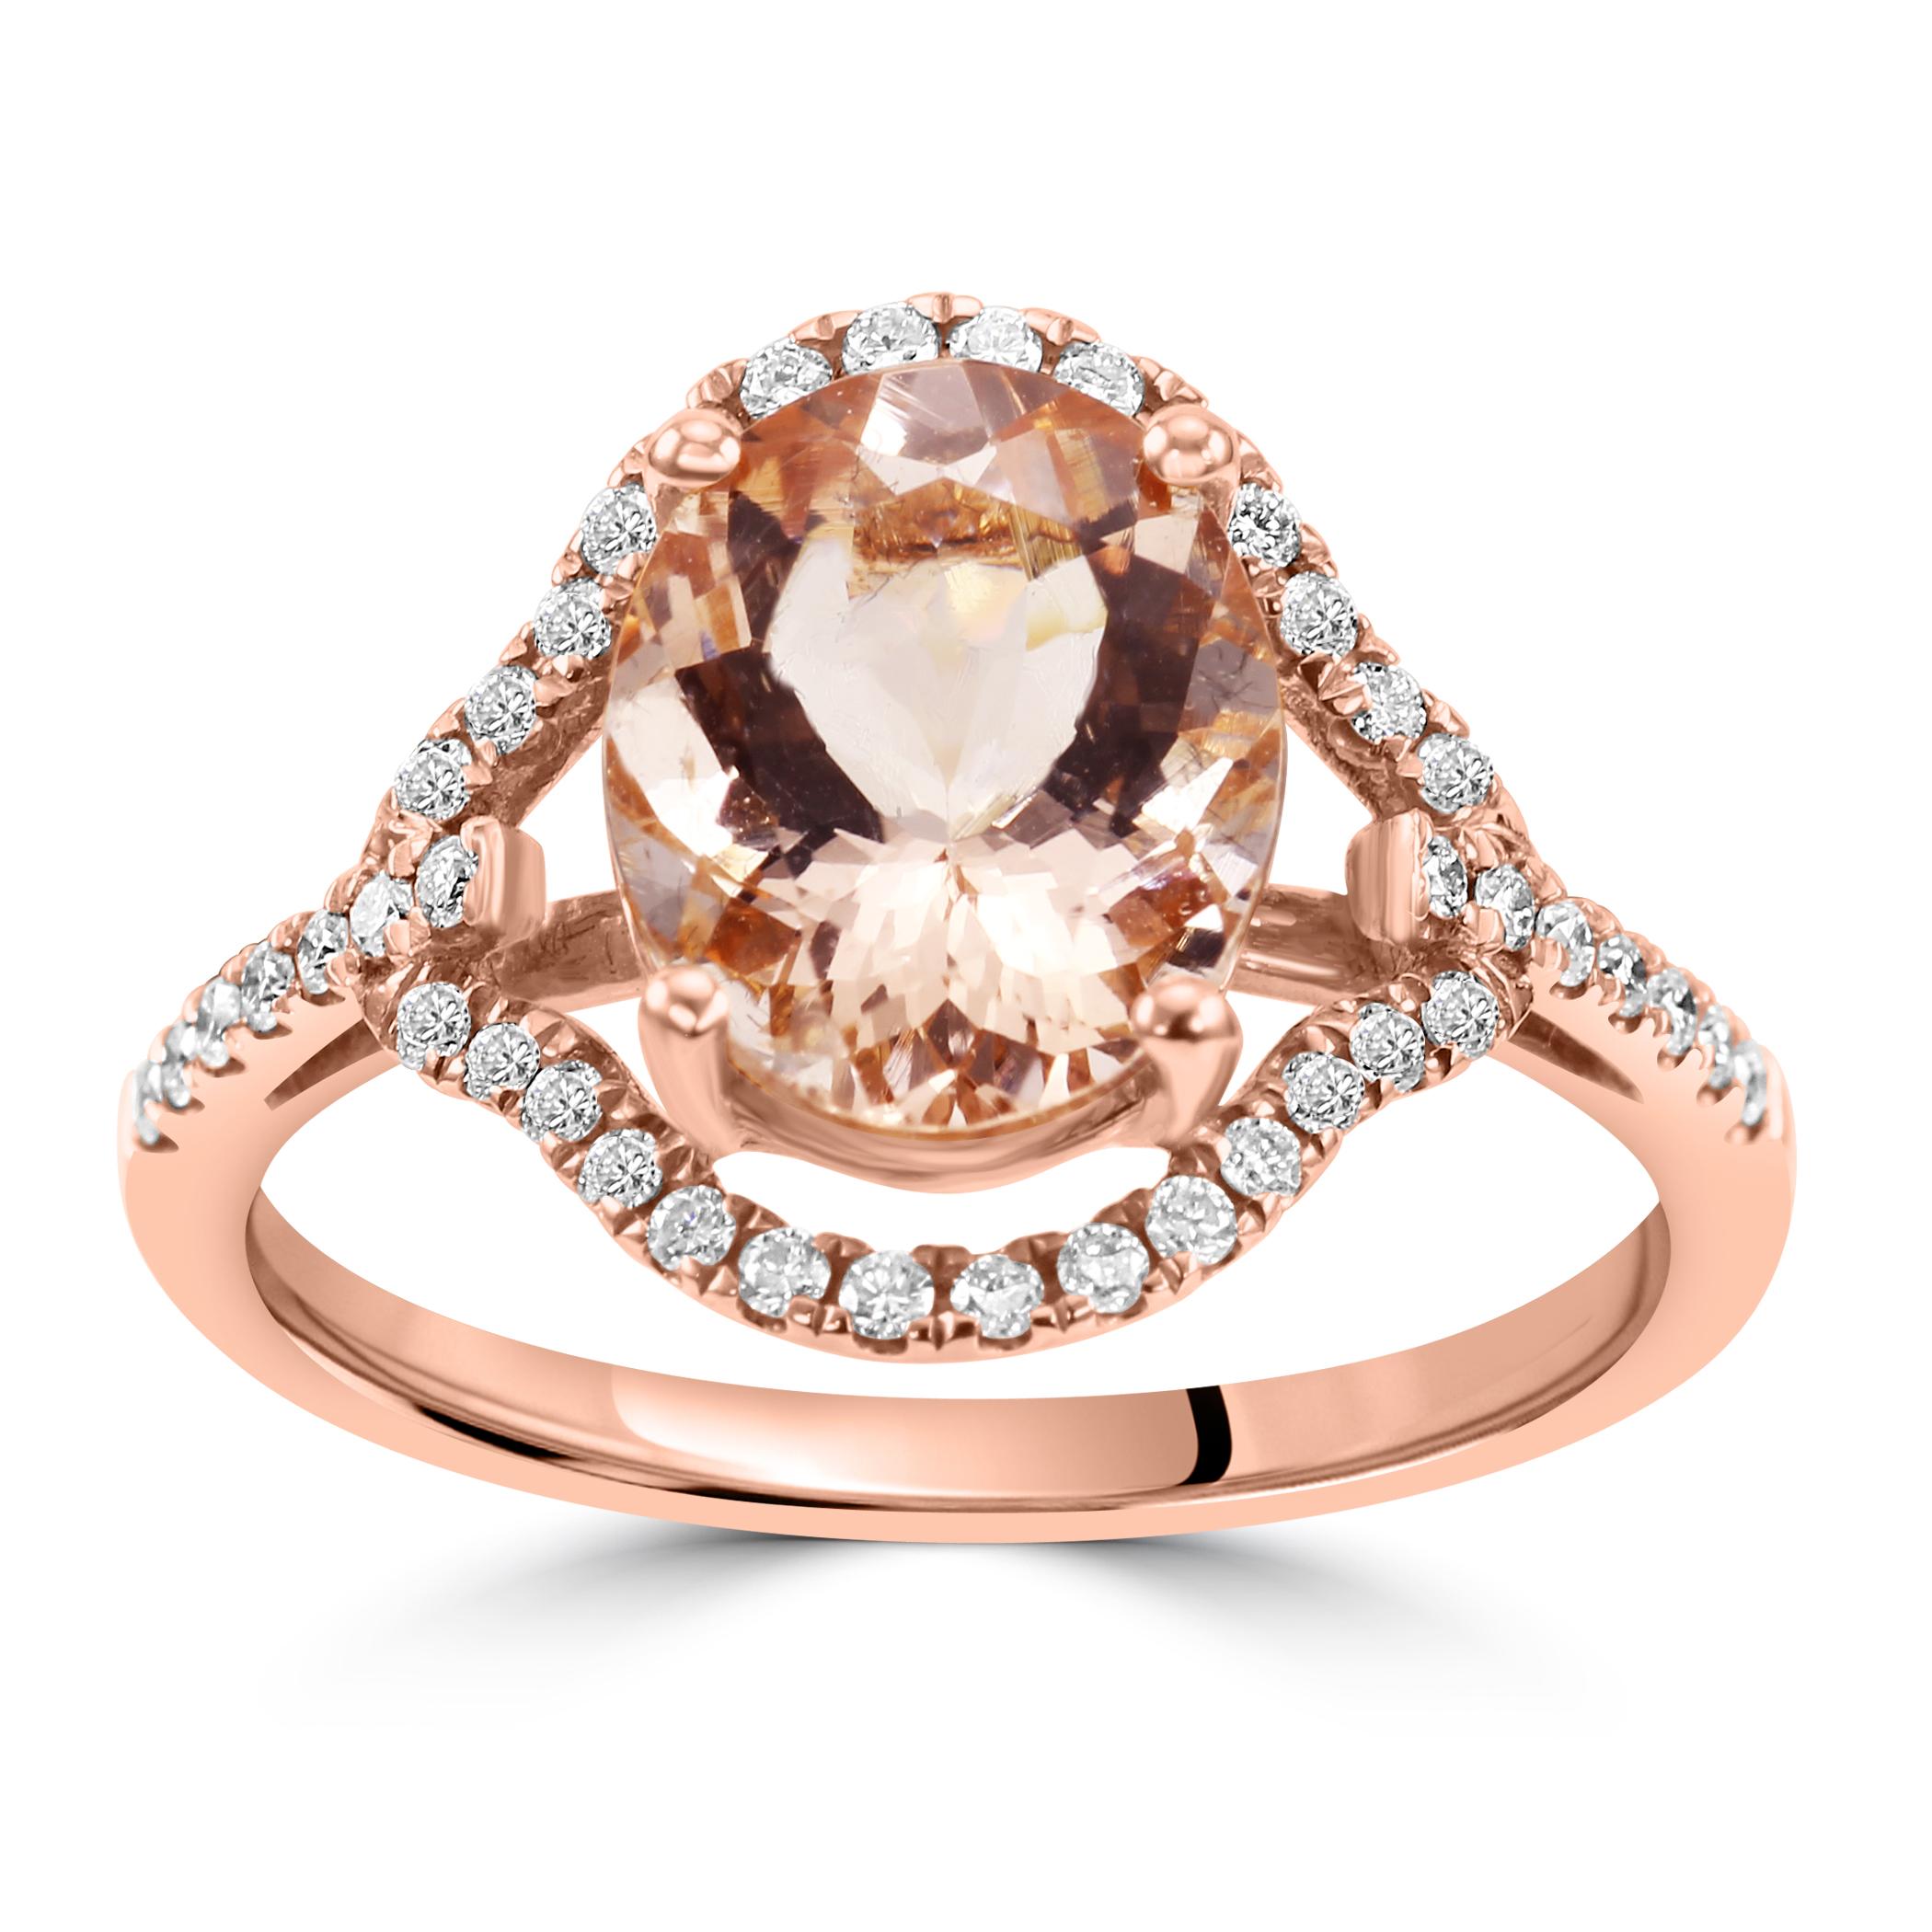 Make your love story come true with our fashion engagement Morganite & Diamond Halo Ring, a blend  of both romance and sophistication. 

The spotlight of this enchanting ring is on the Oval-Shaped Morganite, chosen for its delicate peachy-pink hue